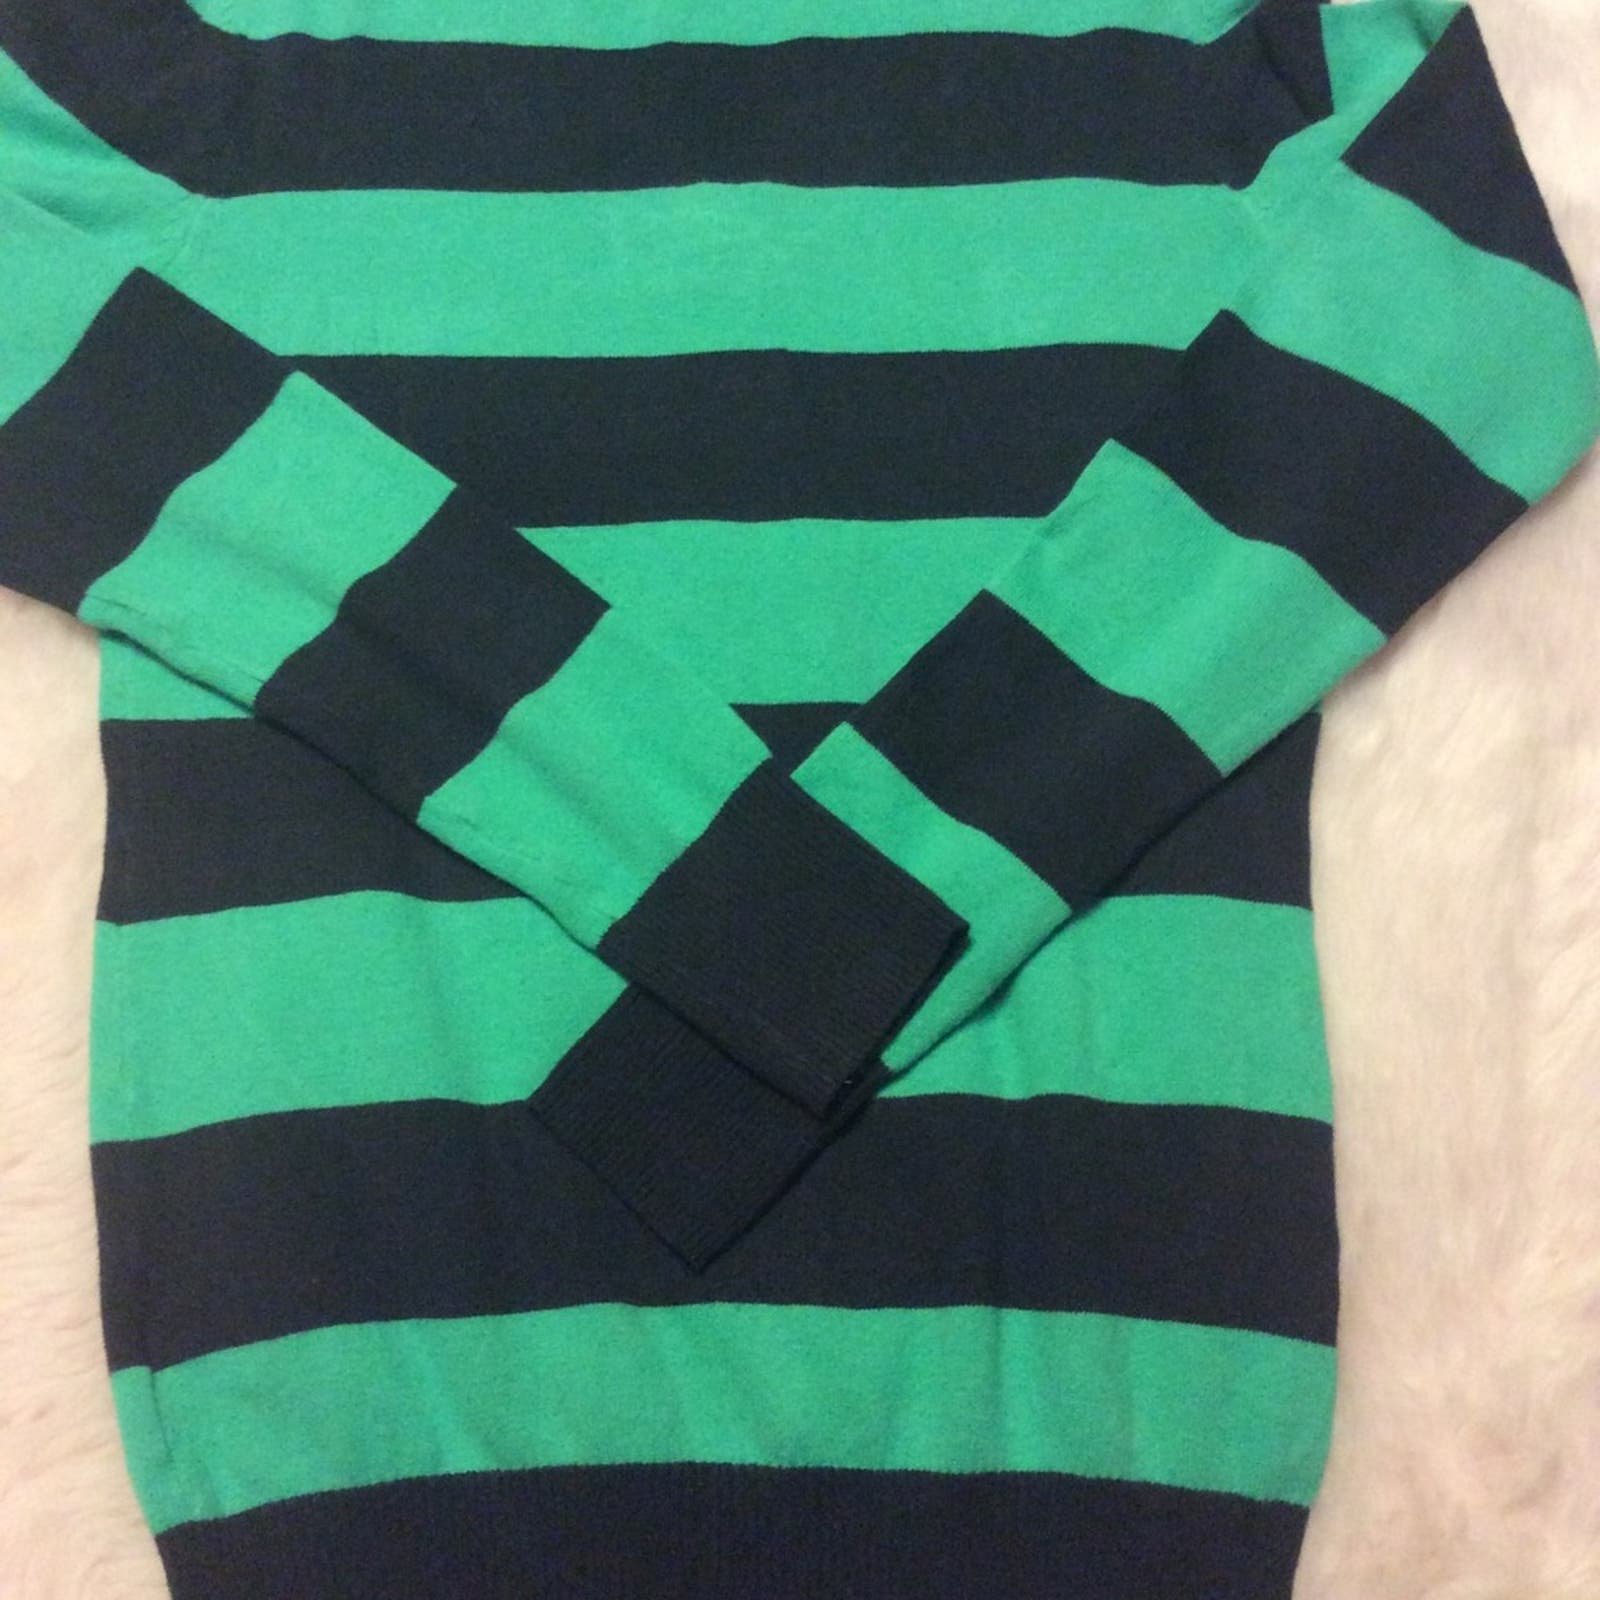 Factory Direct  Gap Women’sLong Sleeve Striped V Front Sweater Sz XS Fq1LCLLhU Low Price